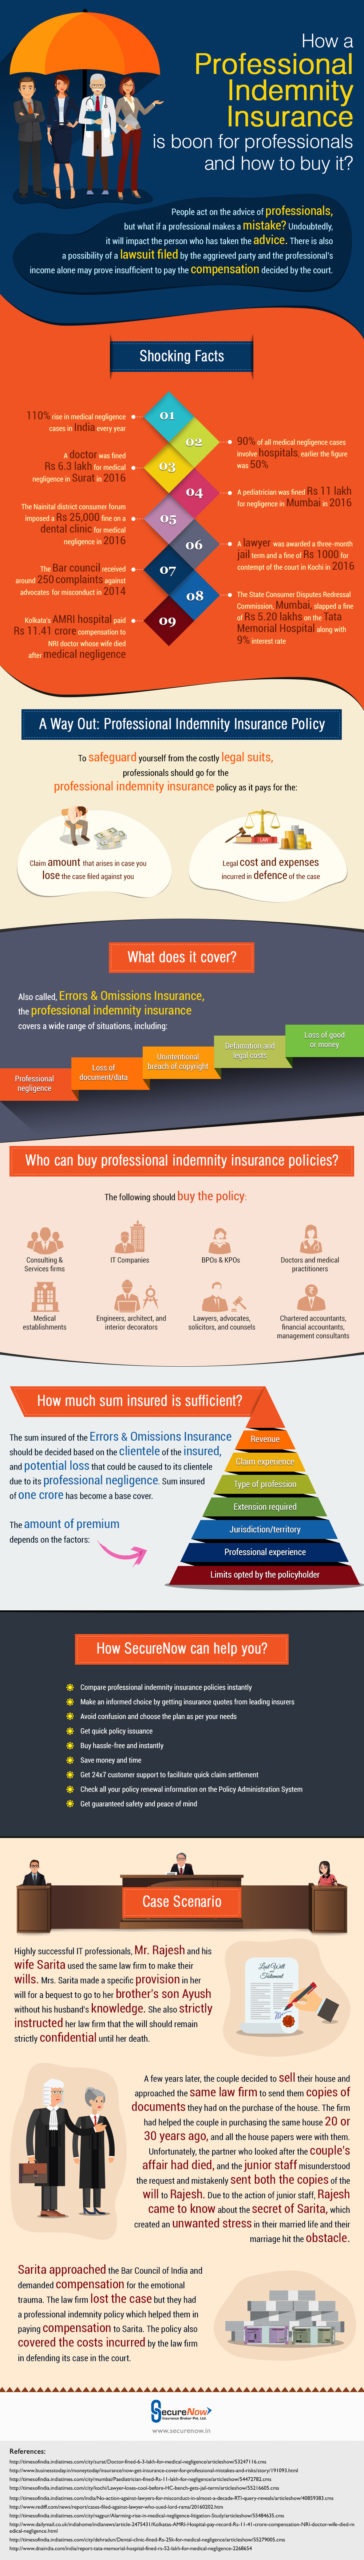 How a Professional Indemnity Insurance is Boon for Professionals and How to Buy it ...